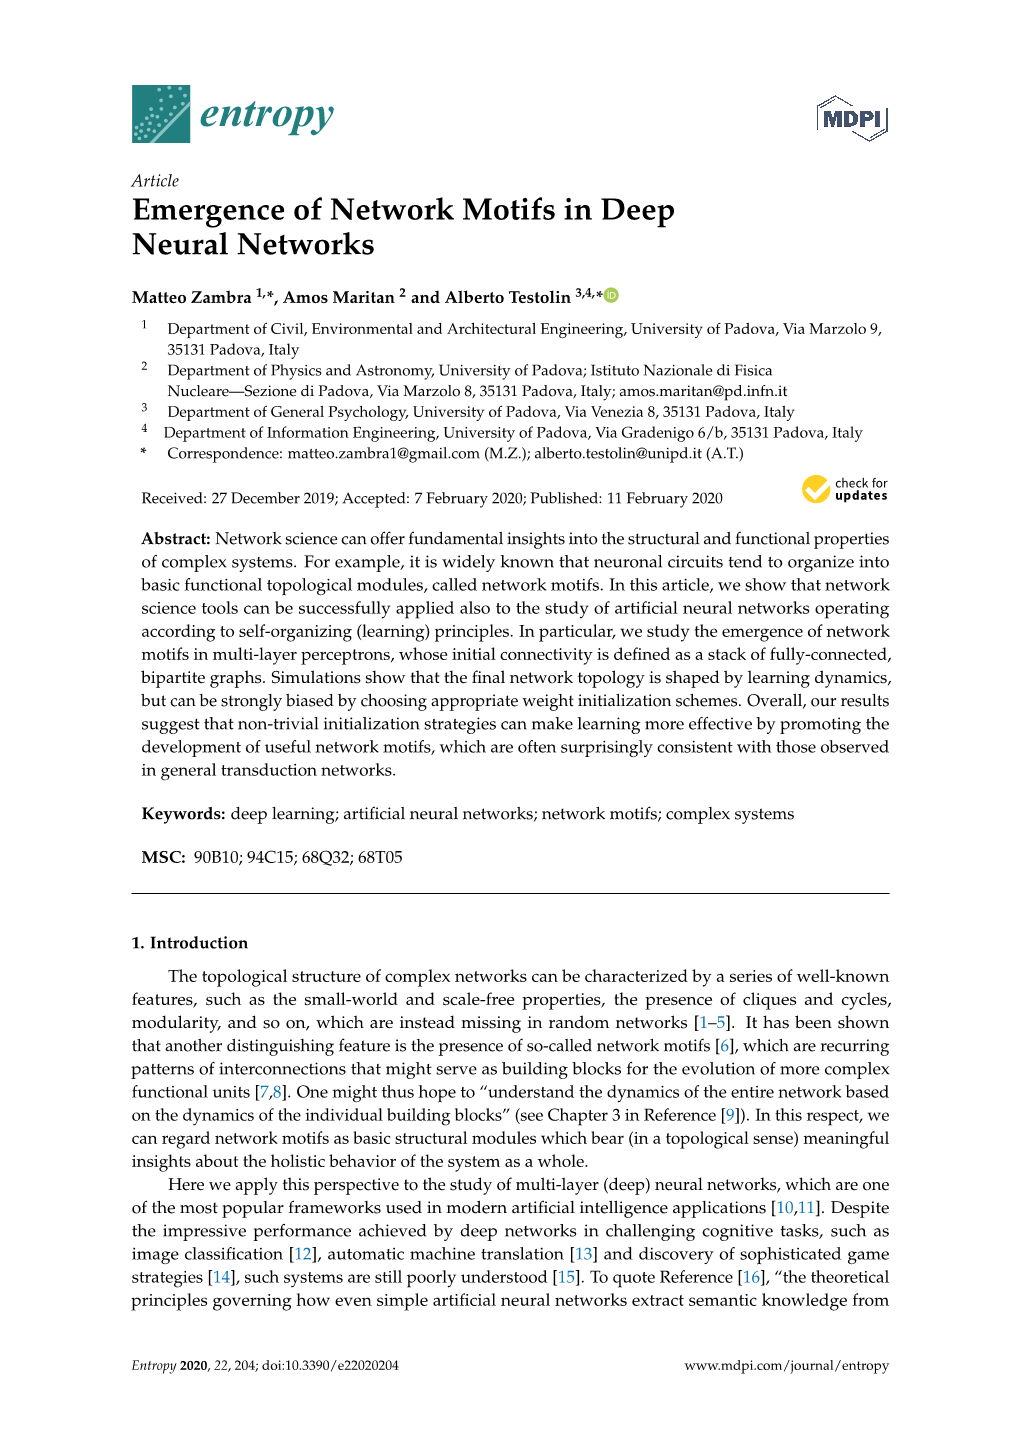 Emergence of Network Motifs in Deep Neural Networks